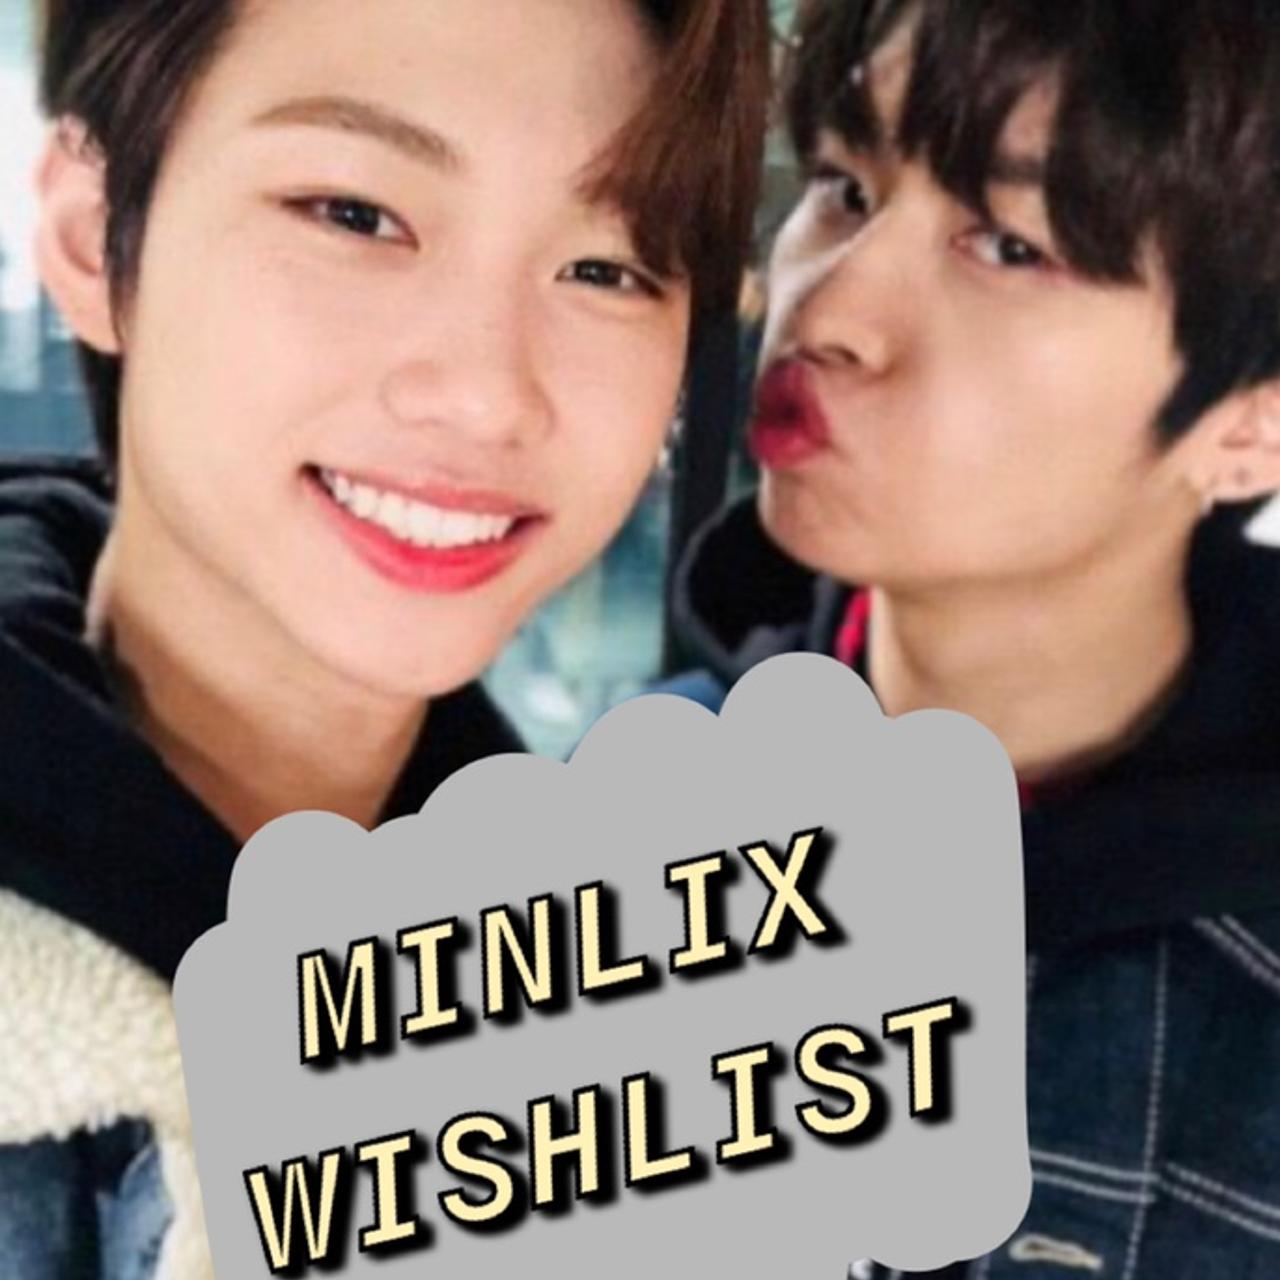 Jeongin dating? is who 